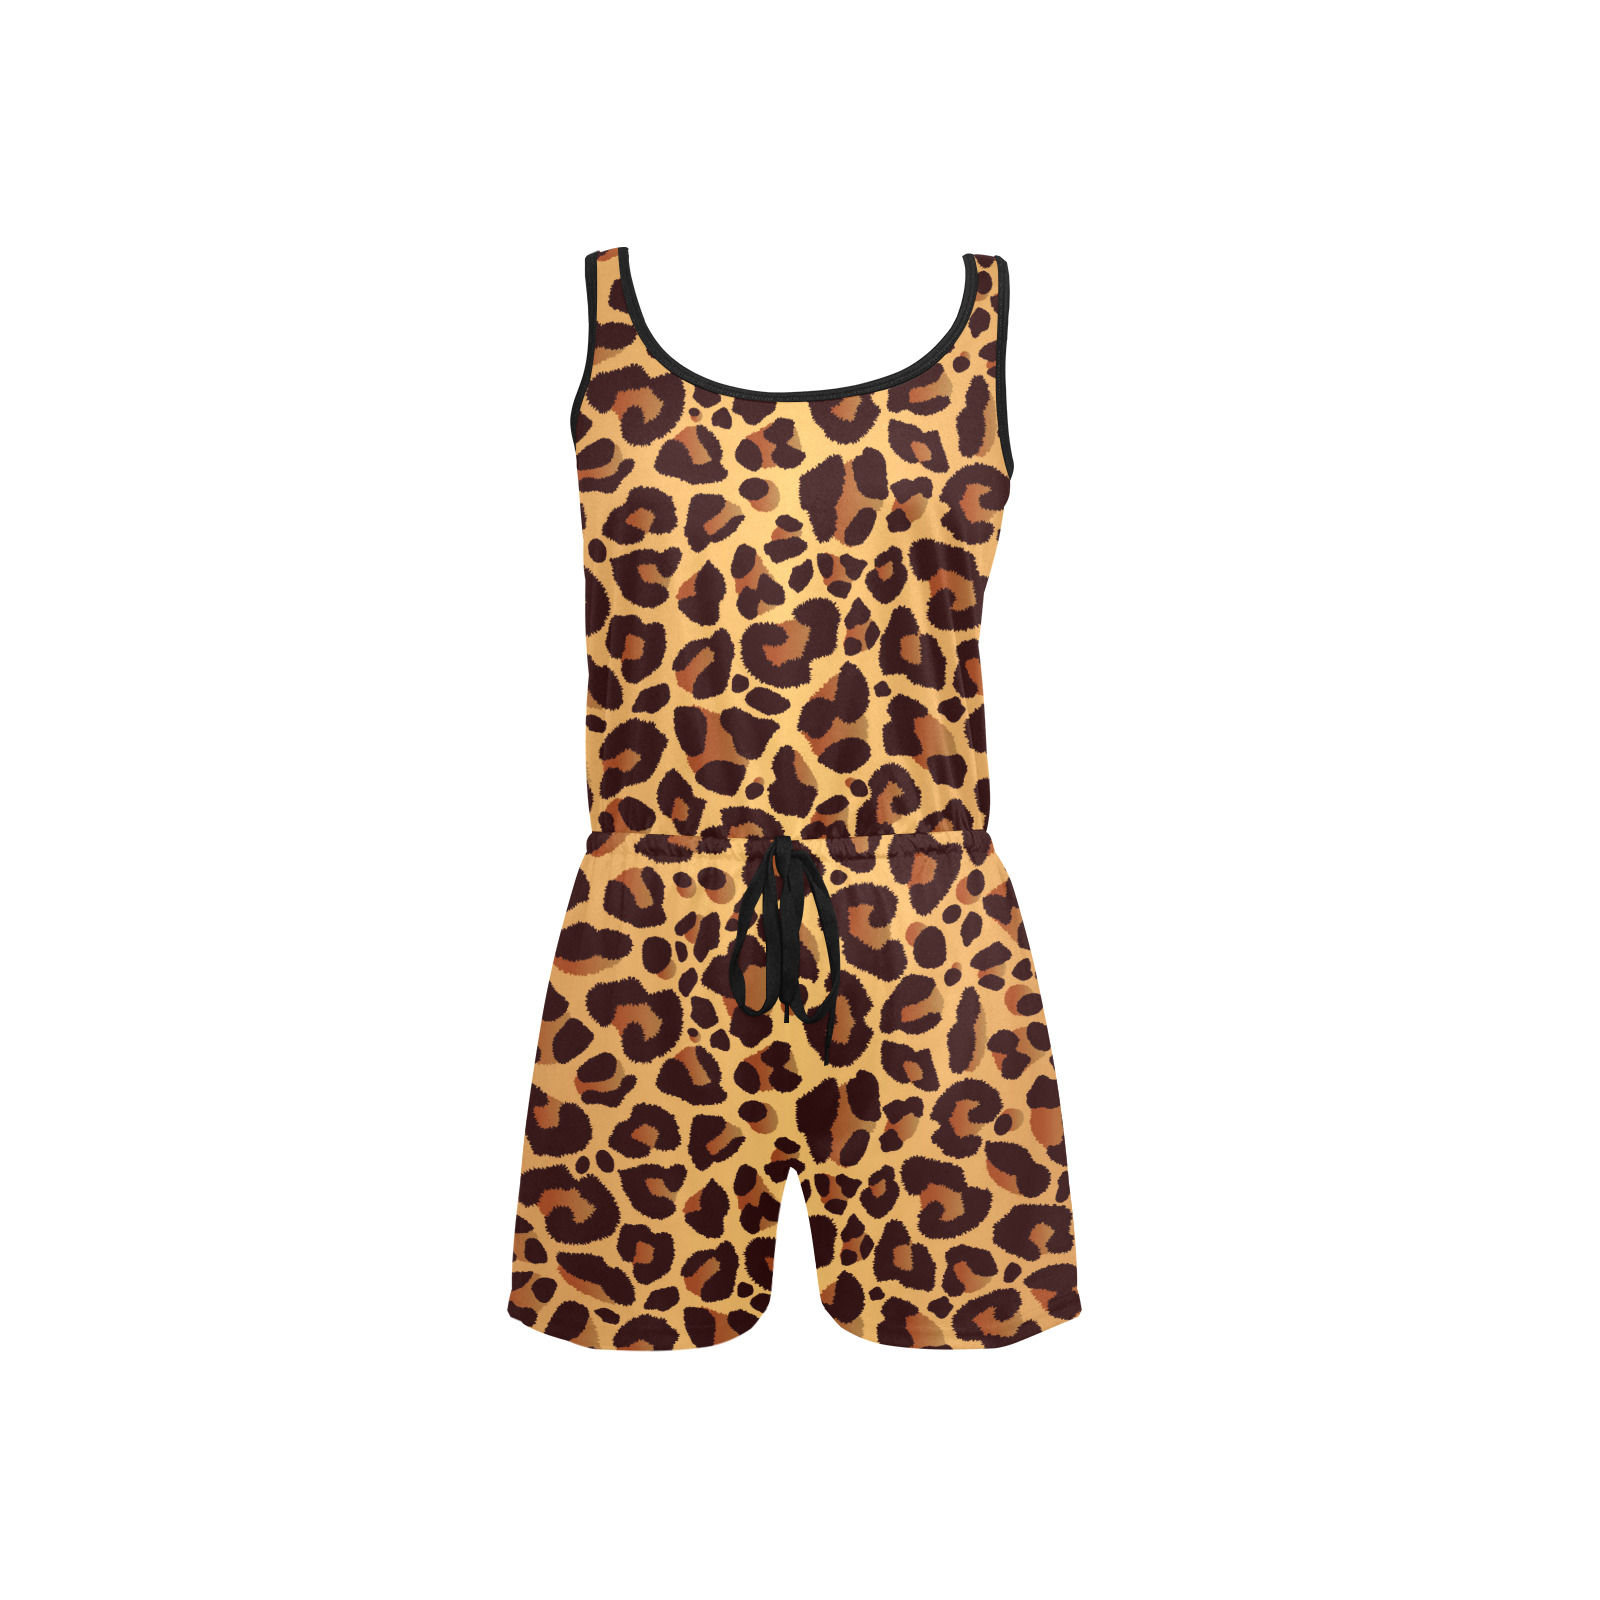 LEOPARD STYLE All Over Print Short Jumpsuit